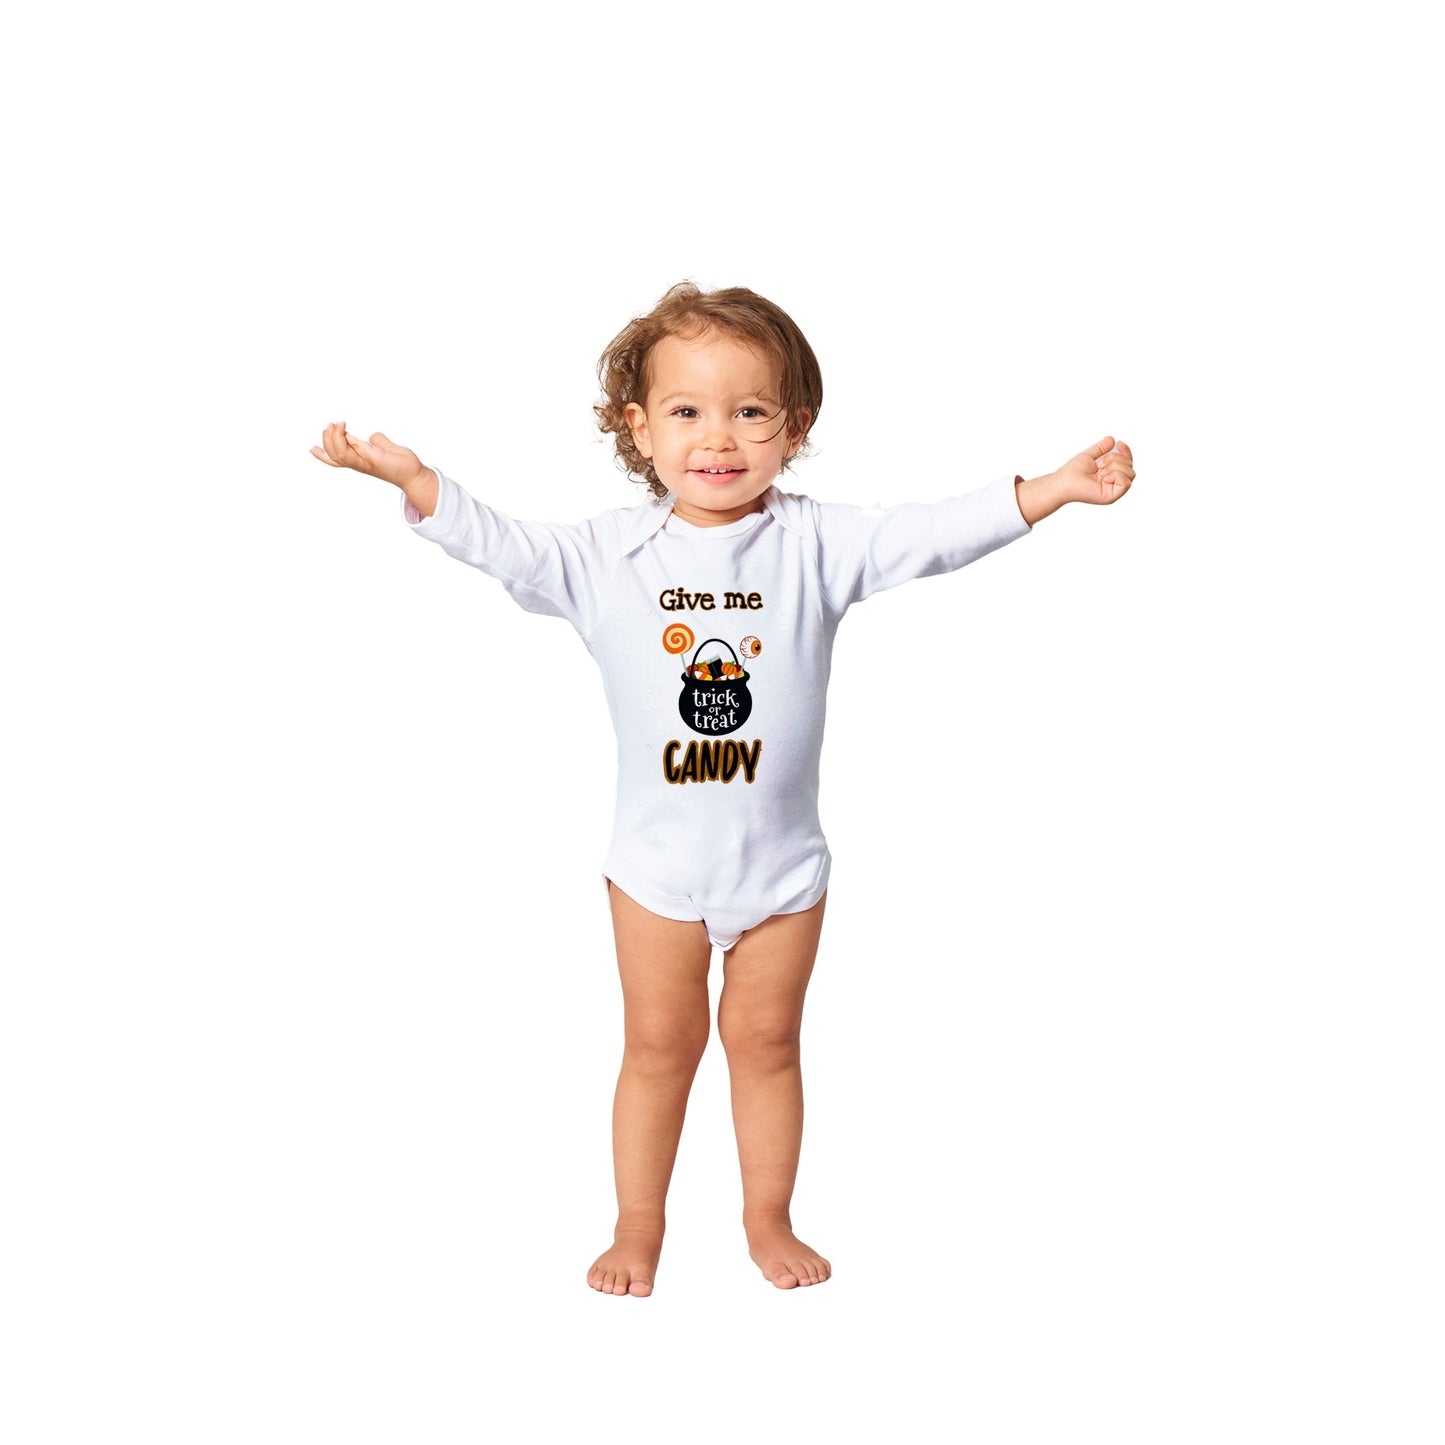 Give me candy -Classic Baby Long Sleeve Bodysuit